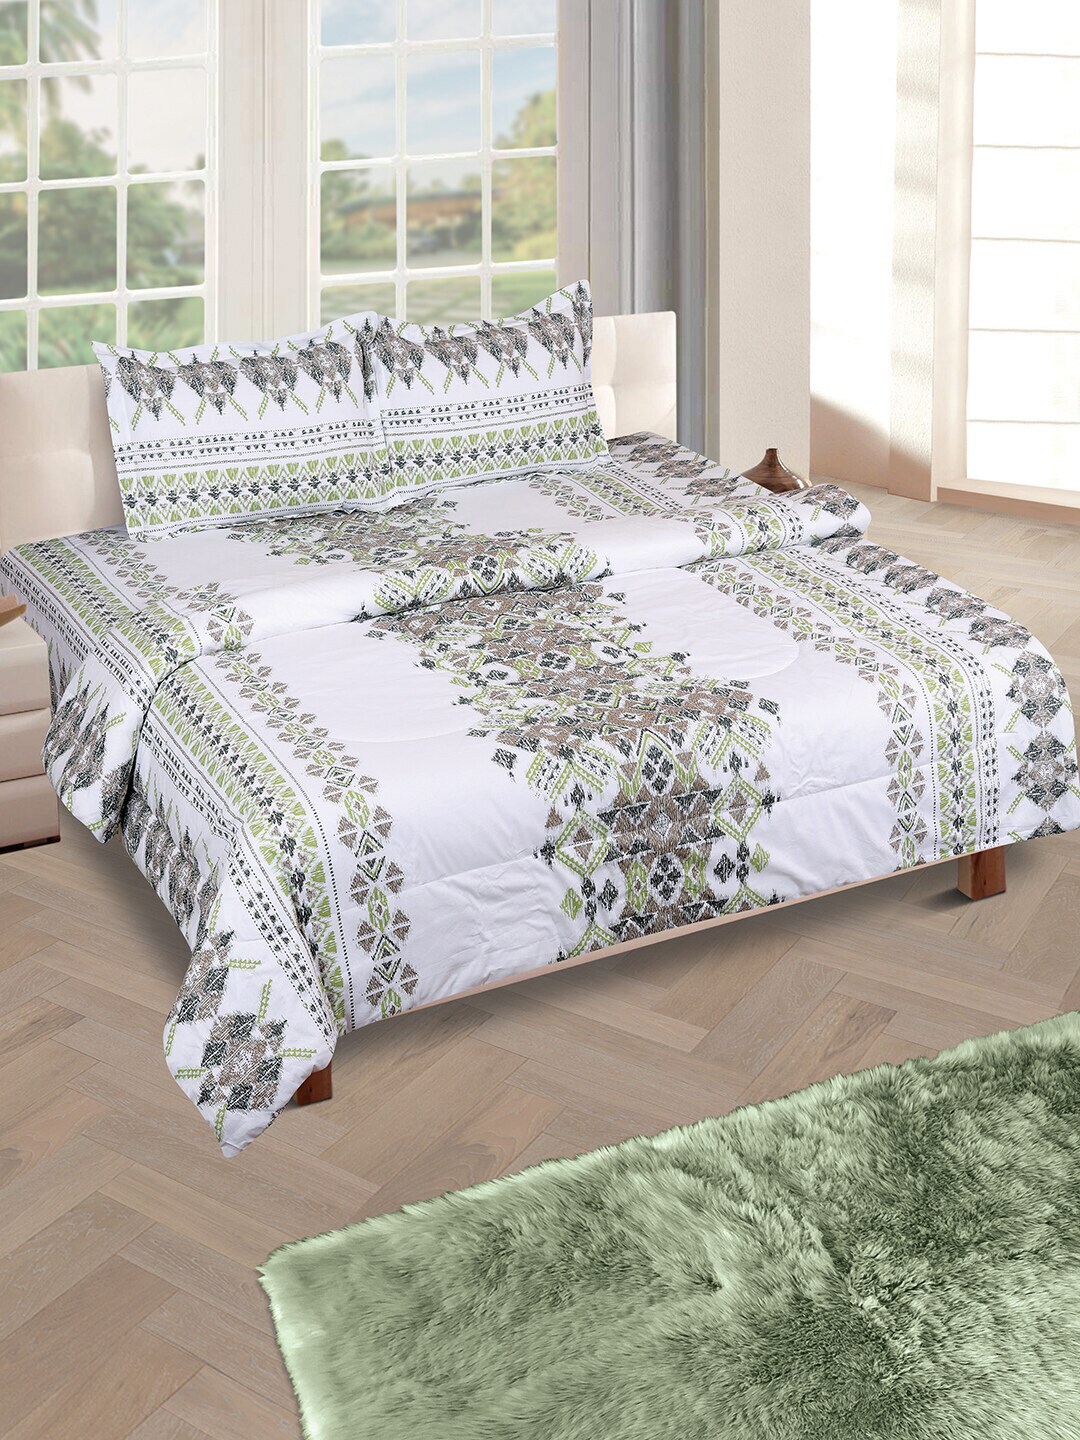 ROMEE Off-White & Green Ethnic Motifs Printed Bedding Set with Reversible Quilt Price in India